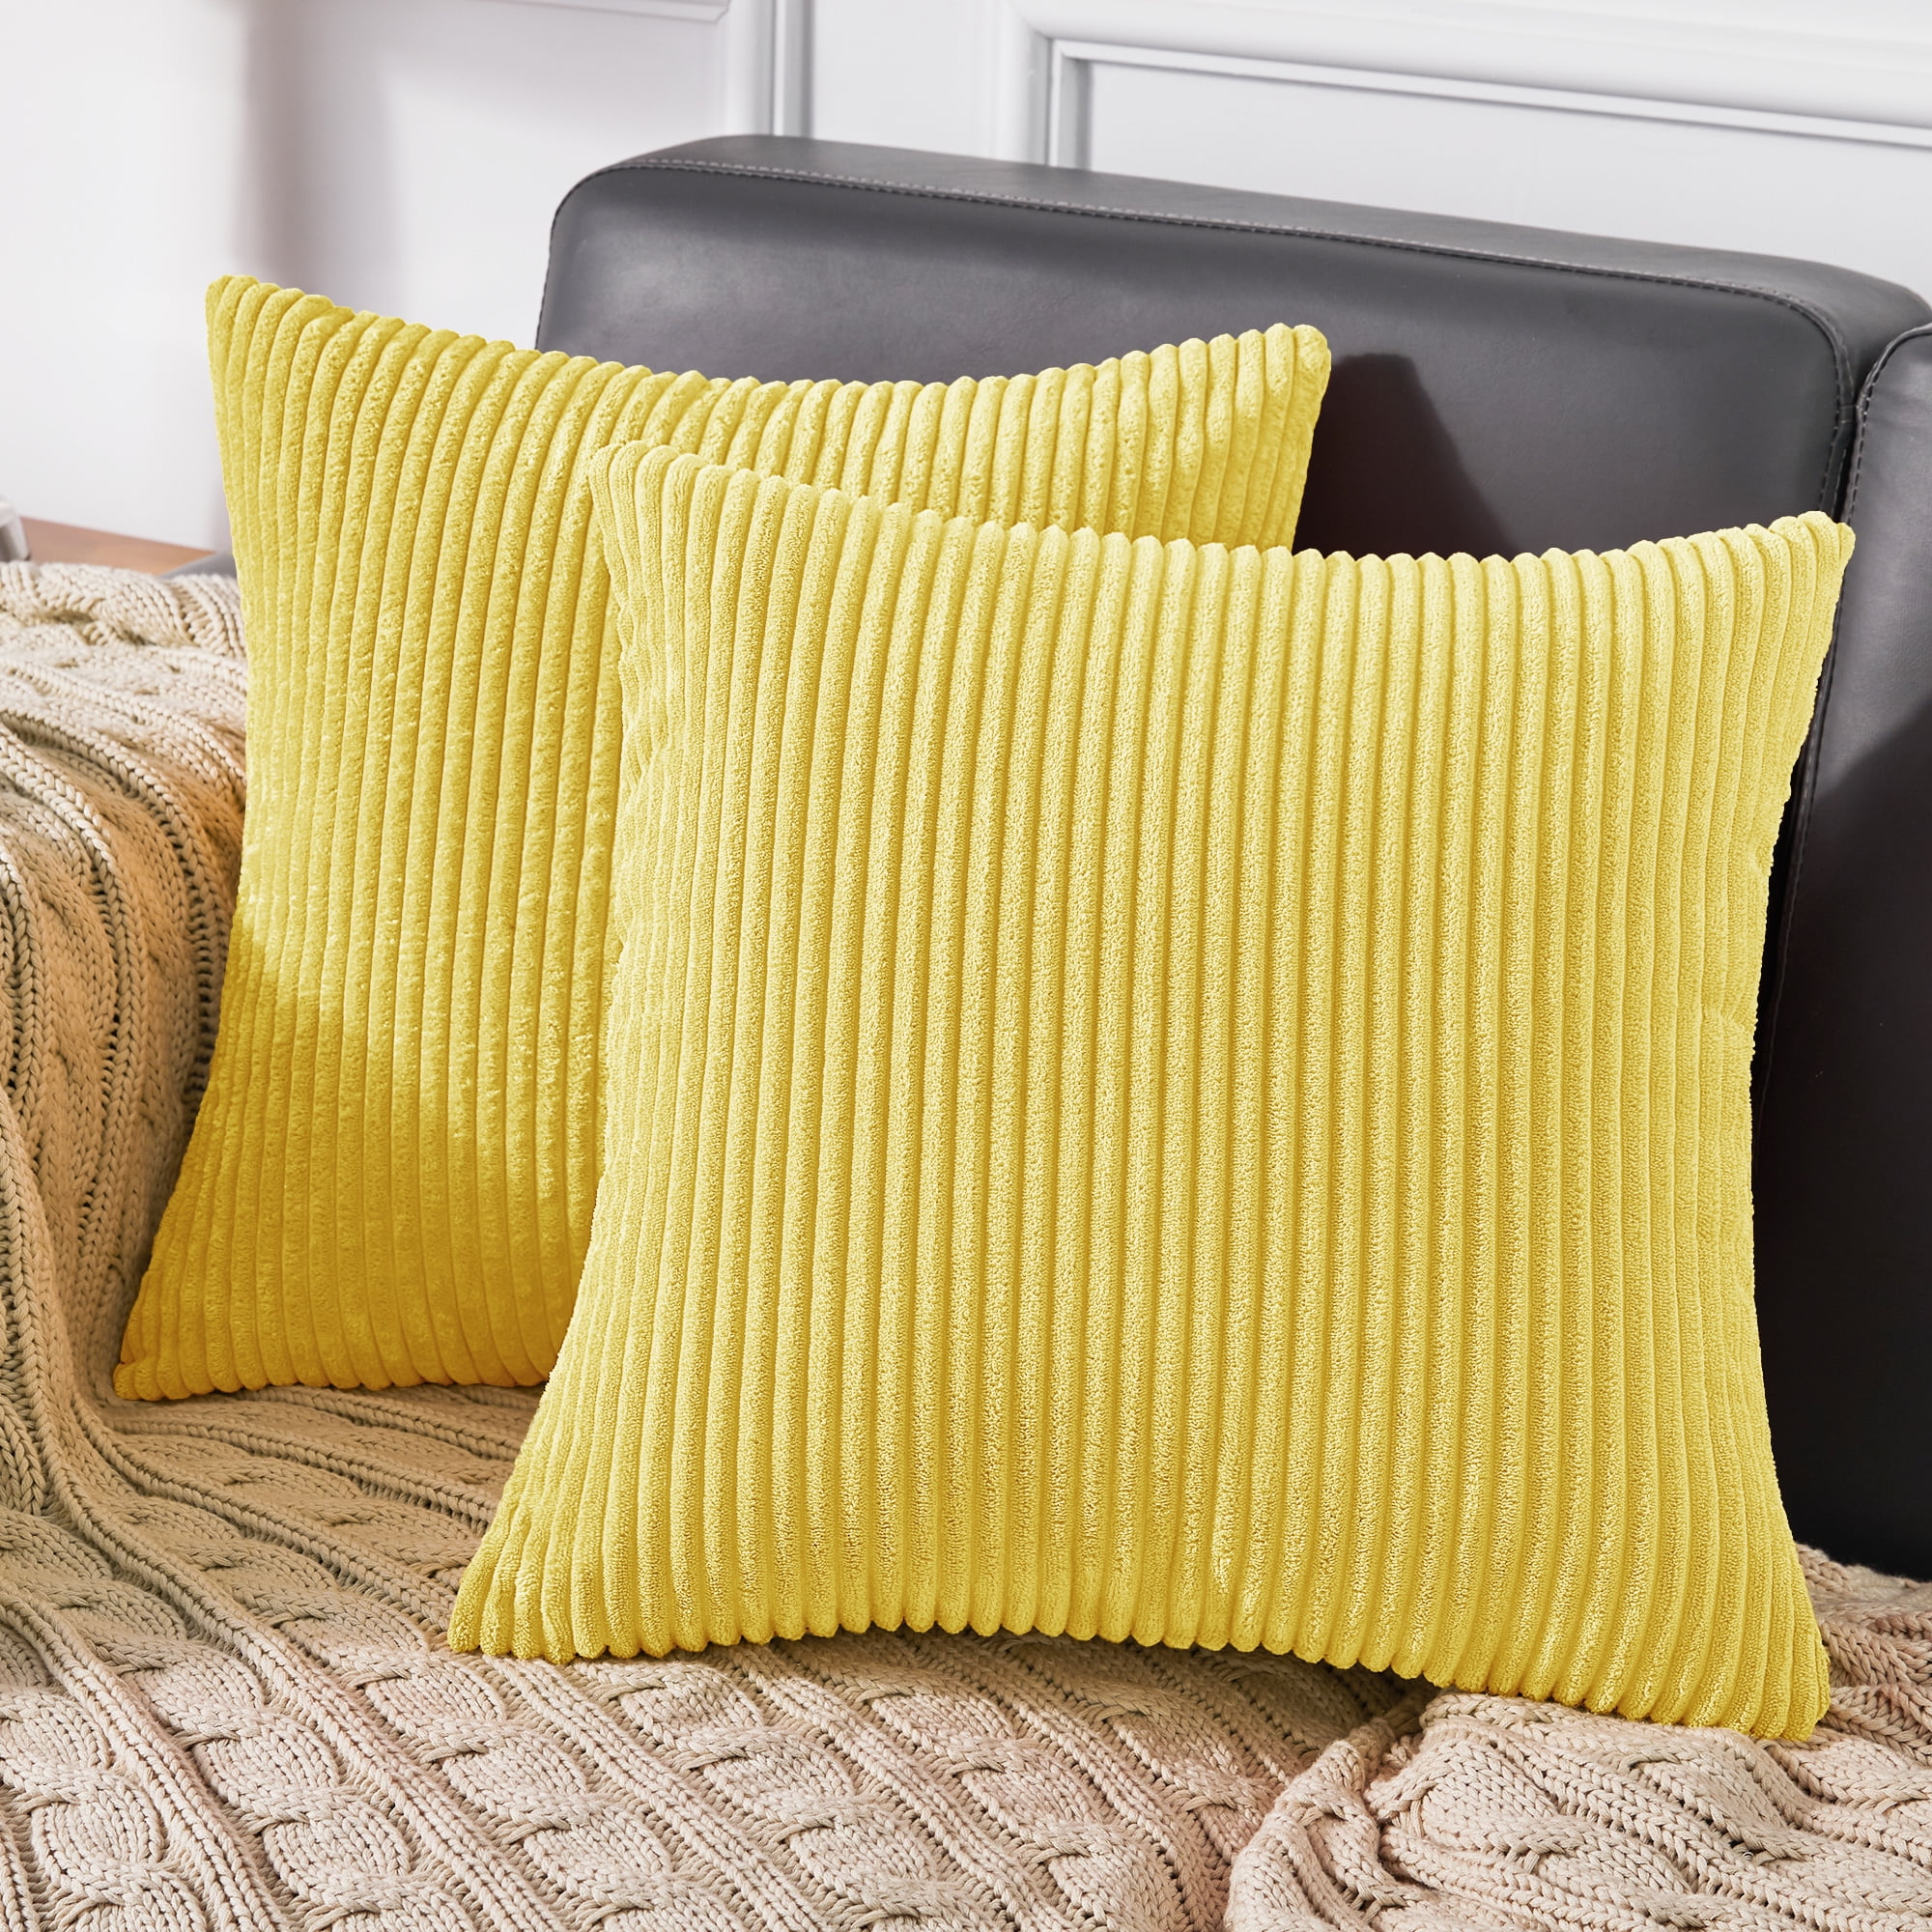 Pack Of 2 Corduroy Soft Soild Decorative Square Throw Pillow Covers Set Cushion  Cases Pillowcases For Sofa Bedroom Couch 18 X 18 Inch Golden Yellow